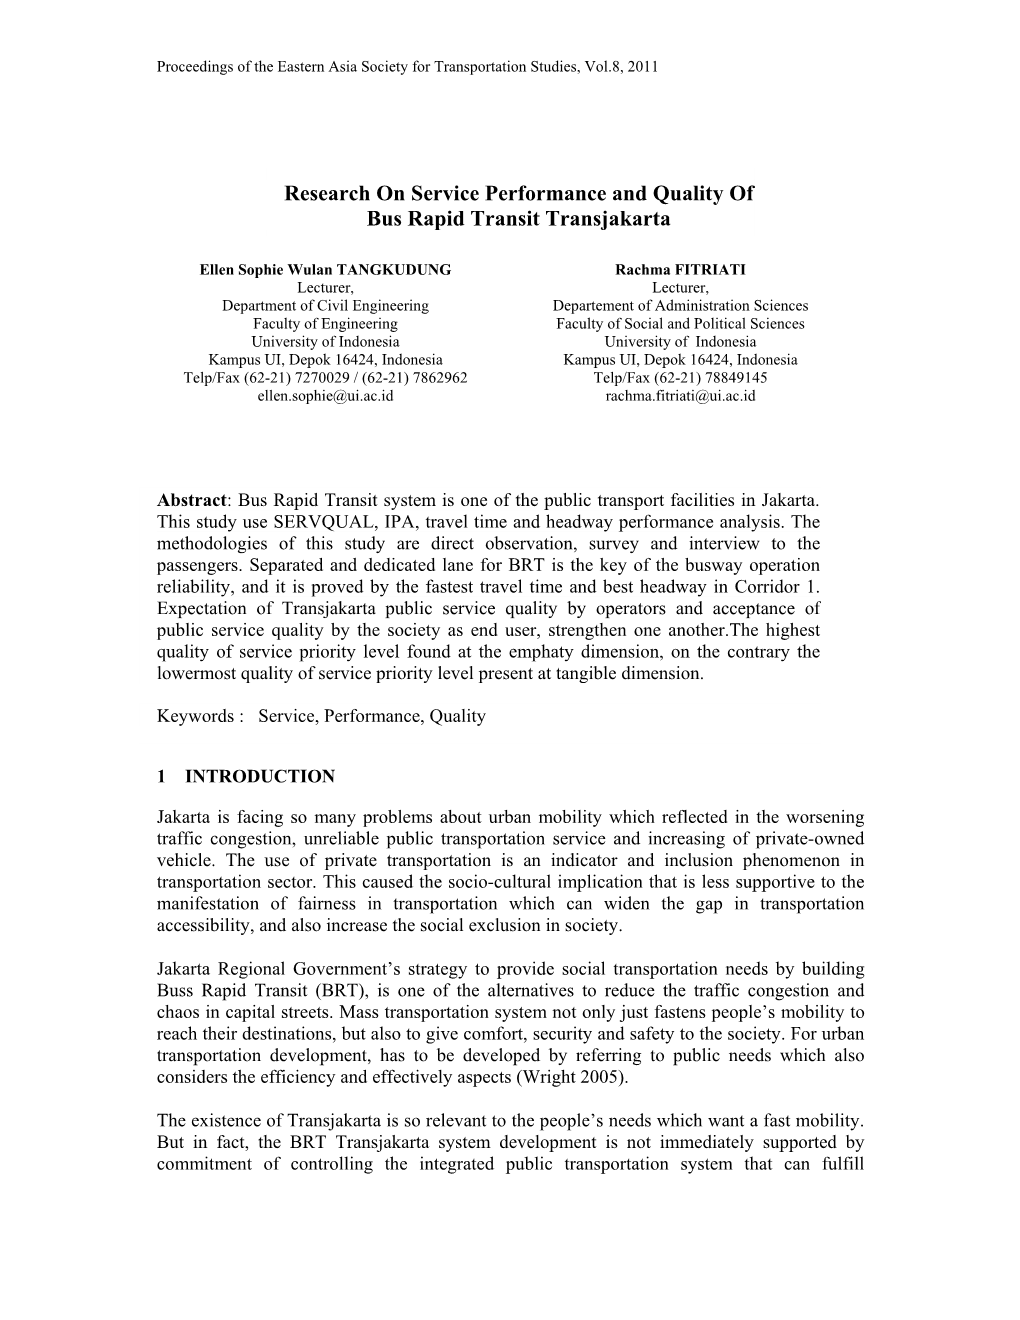 Research on Service Performance and Quality of Bus Rapid Transit Transjakarta